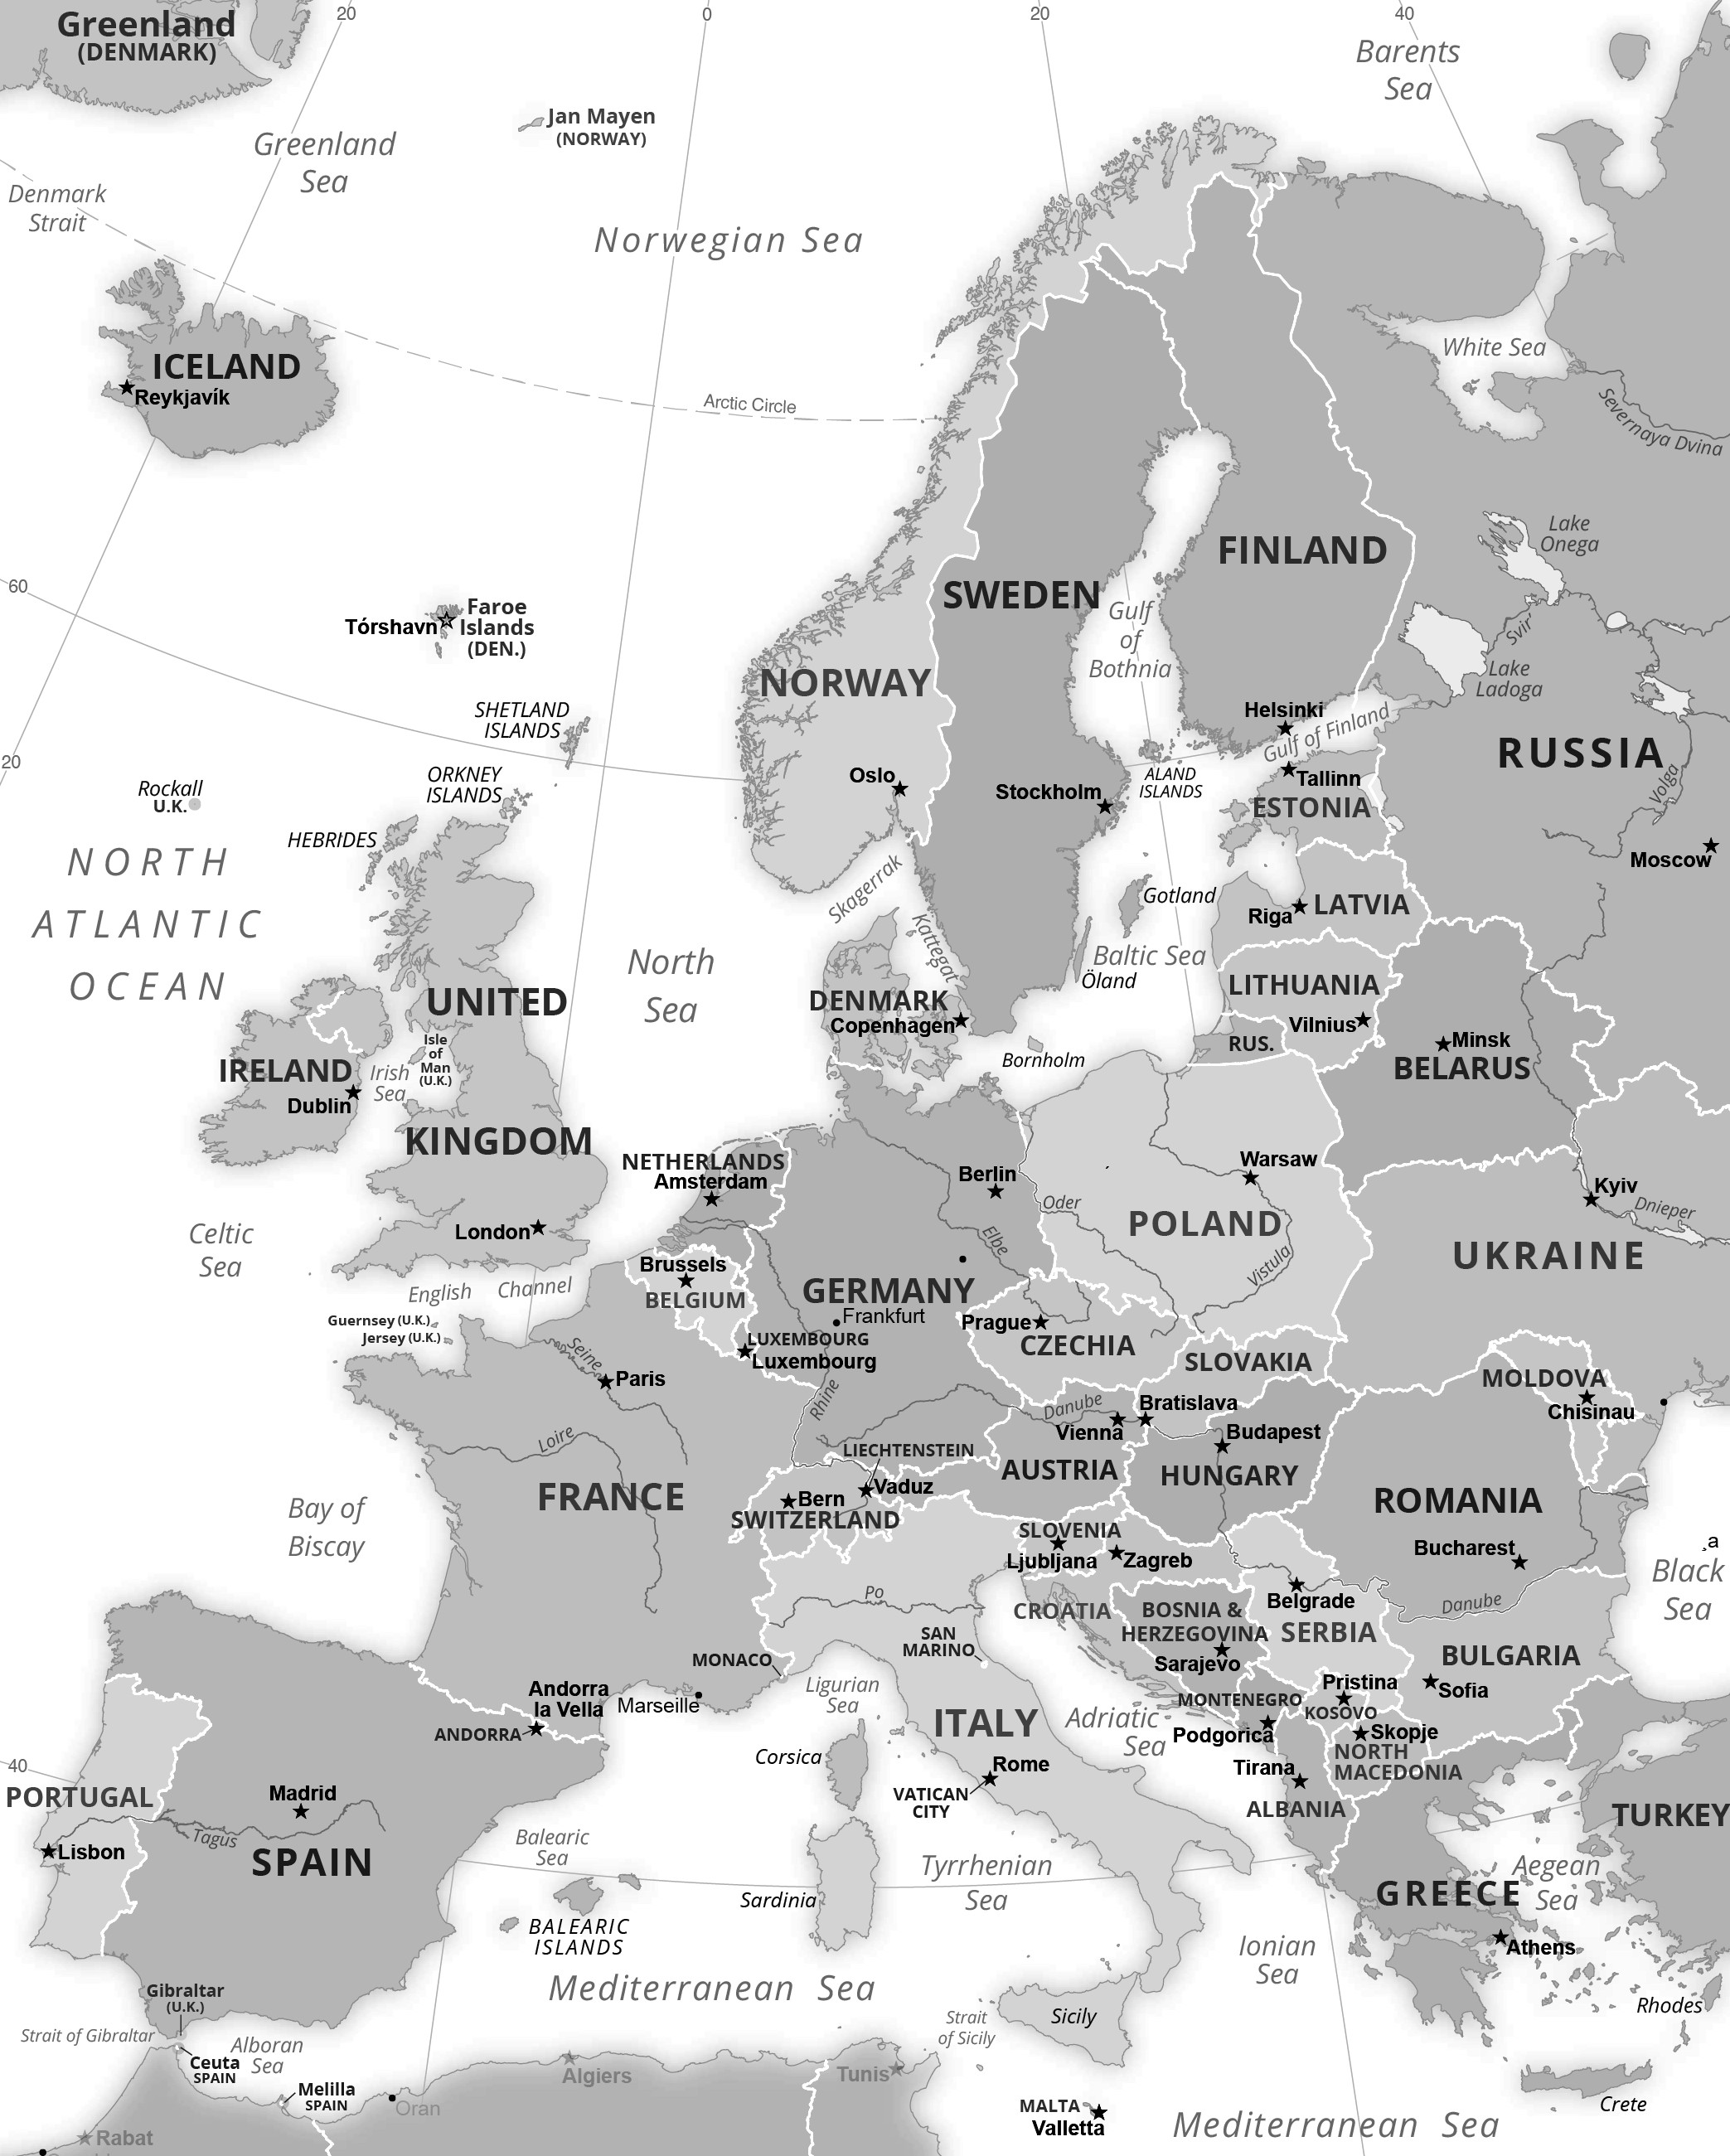 A black-and-white map of Europe, including the United Kingdom, Ireland, France, Spain, Portugal, Italy, Germany, and others.